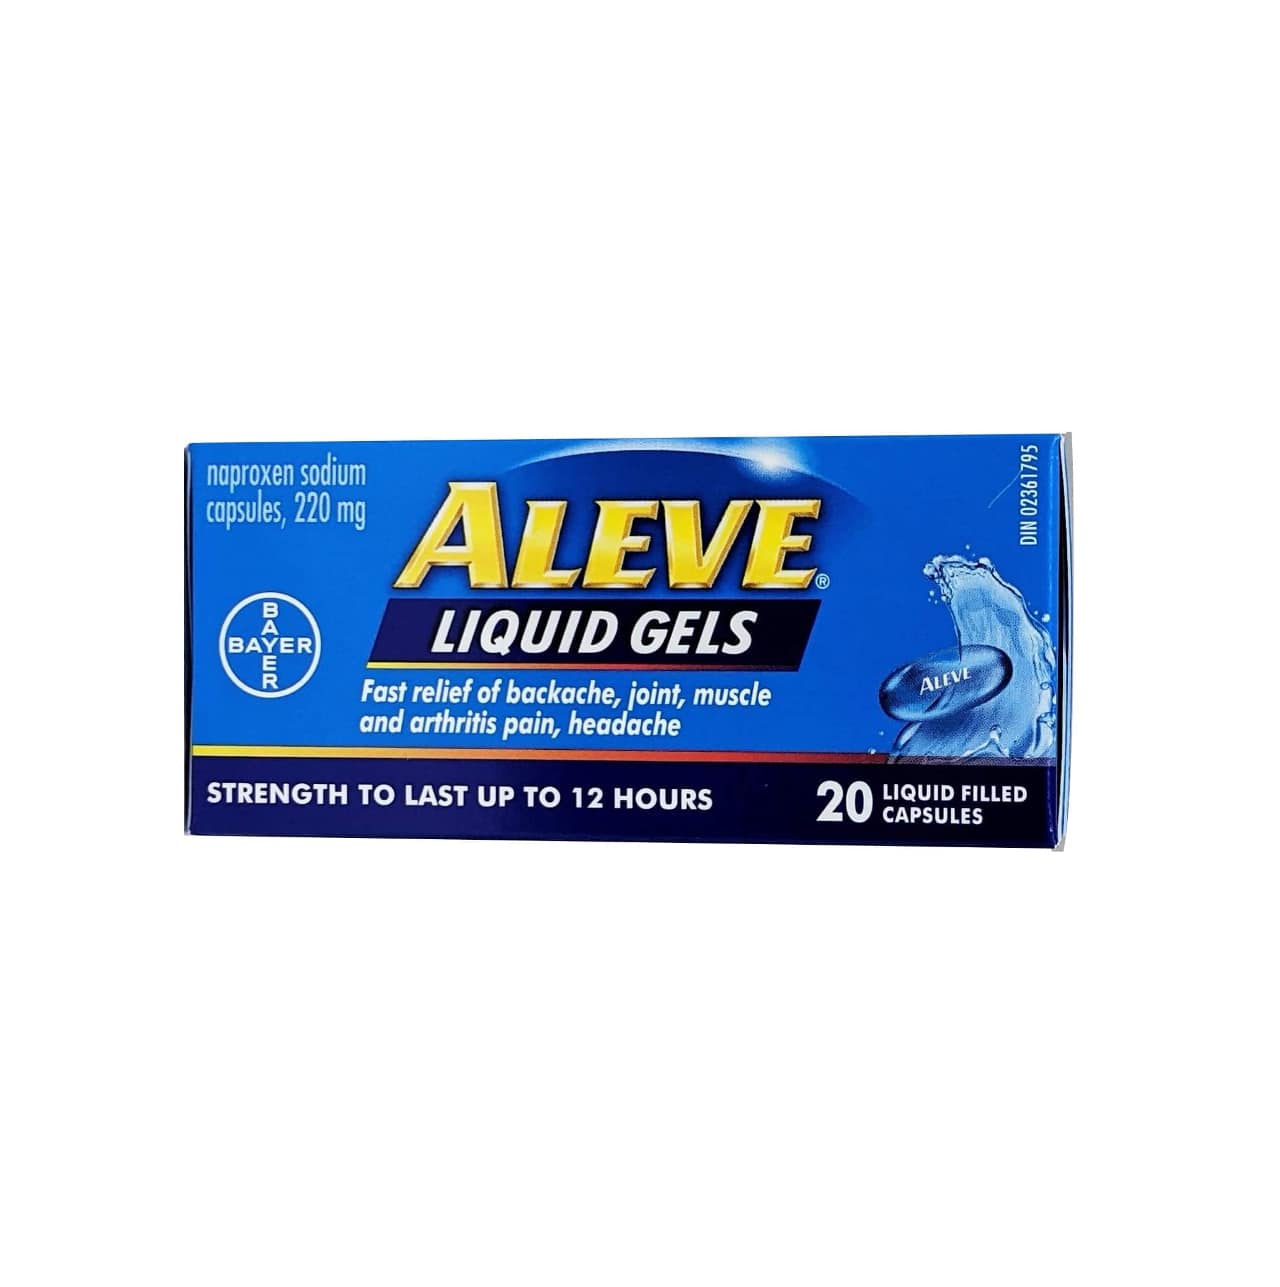 English product label for Aleve Naproxen Sodium 220mg Liquid Gel Capsules